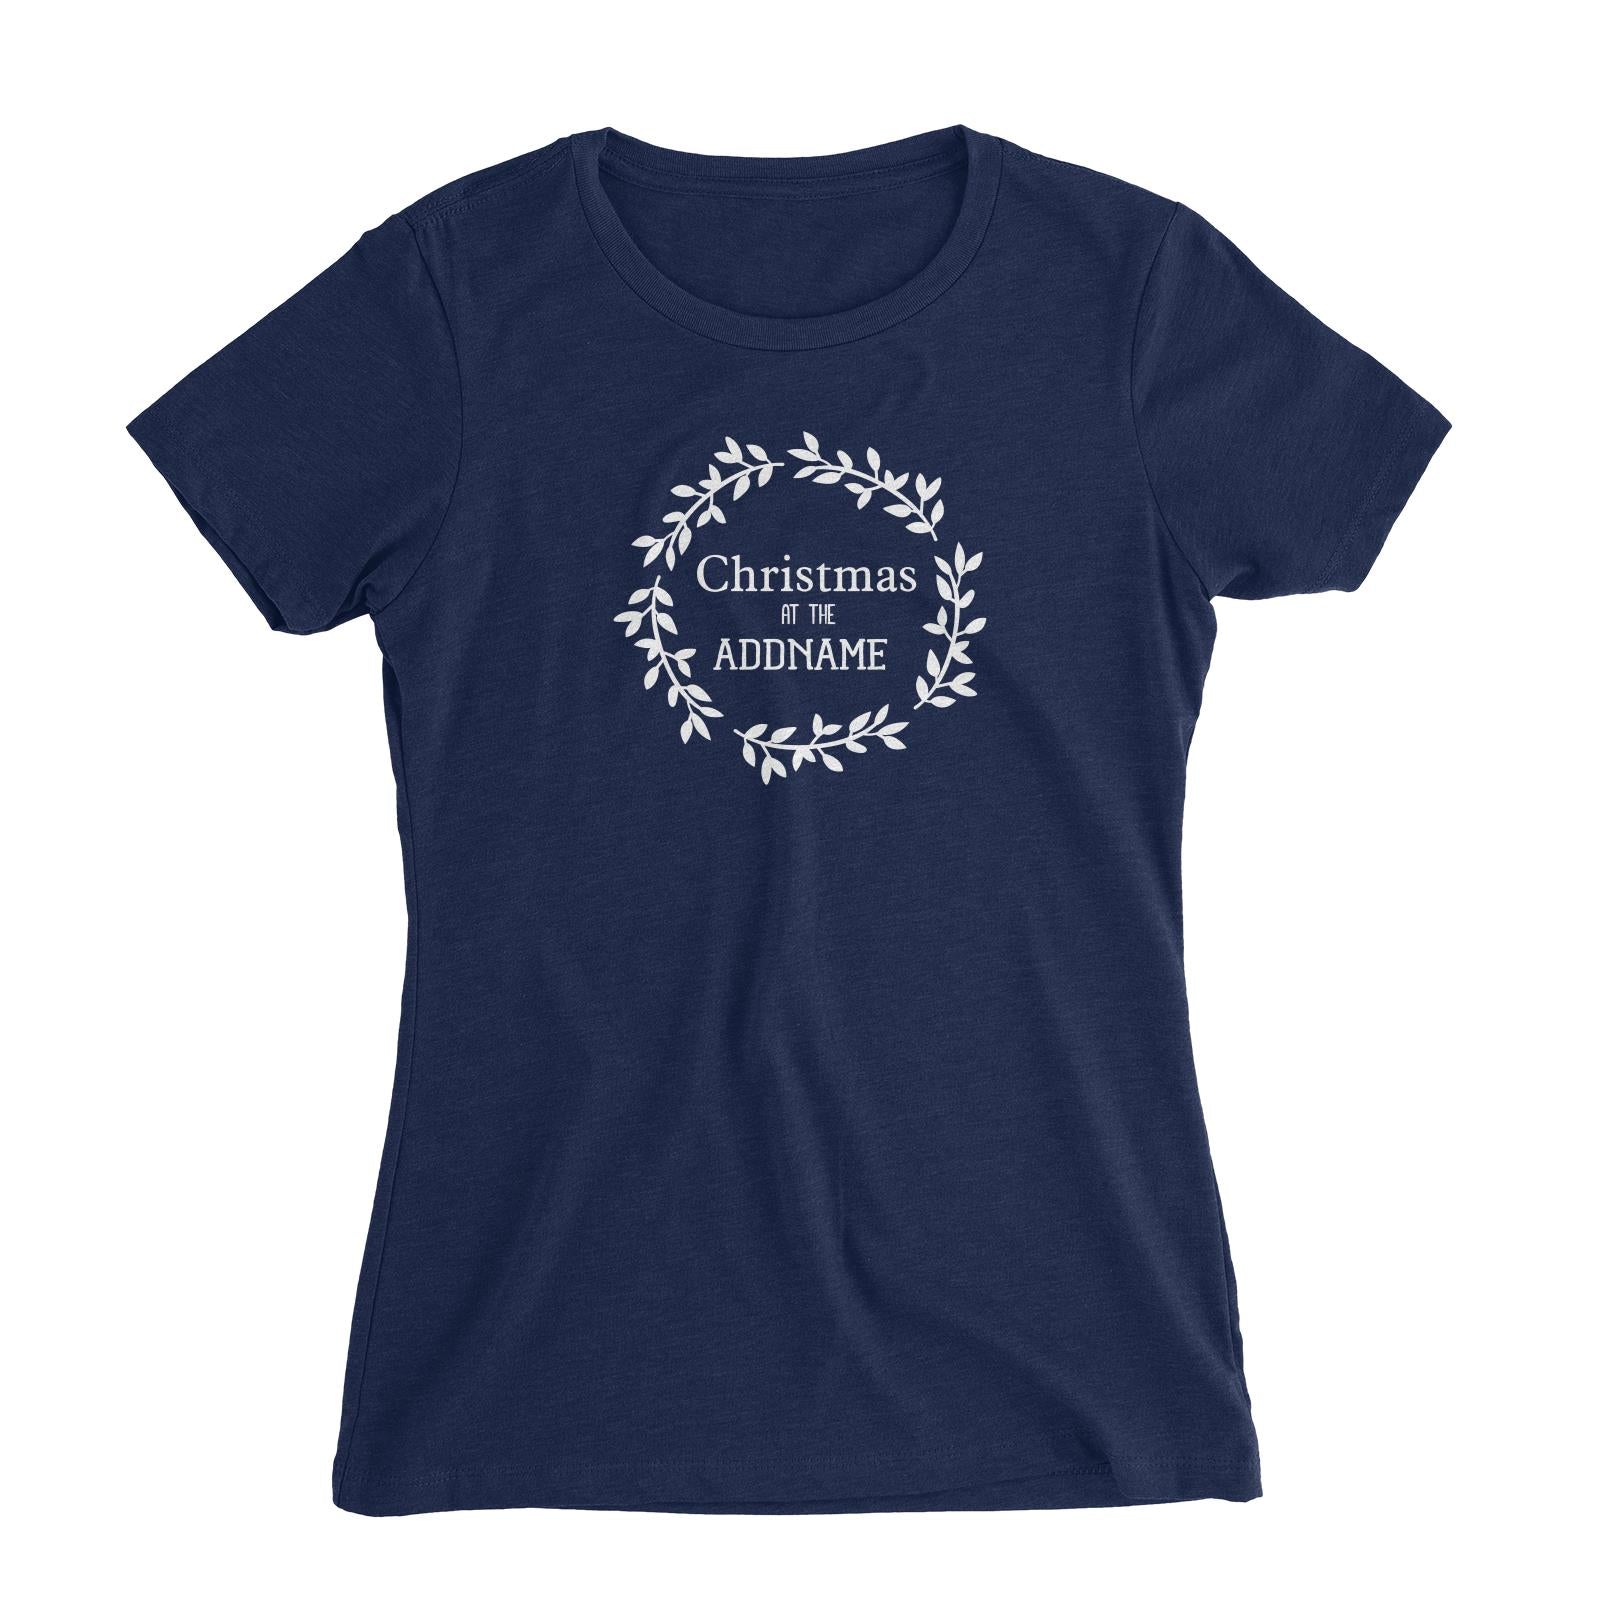 Xmas Christmas At The Flower Wreath Women's Slim Fit T-Shirt